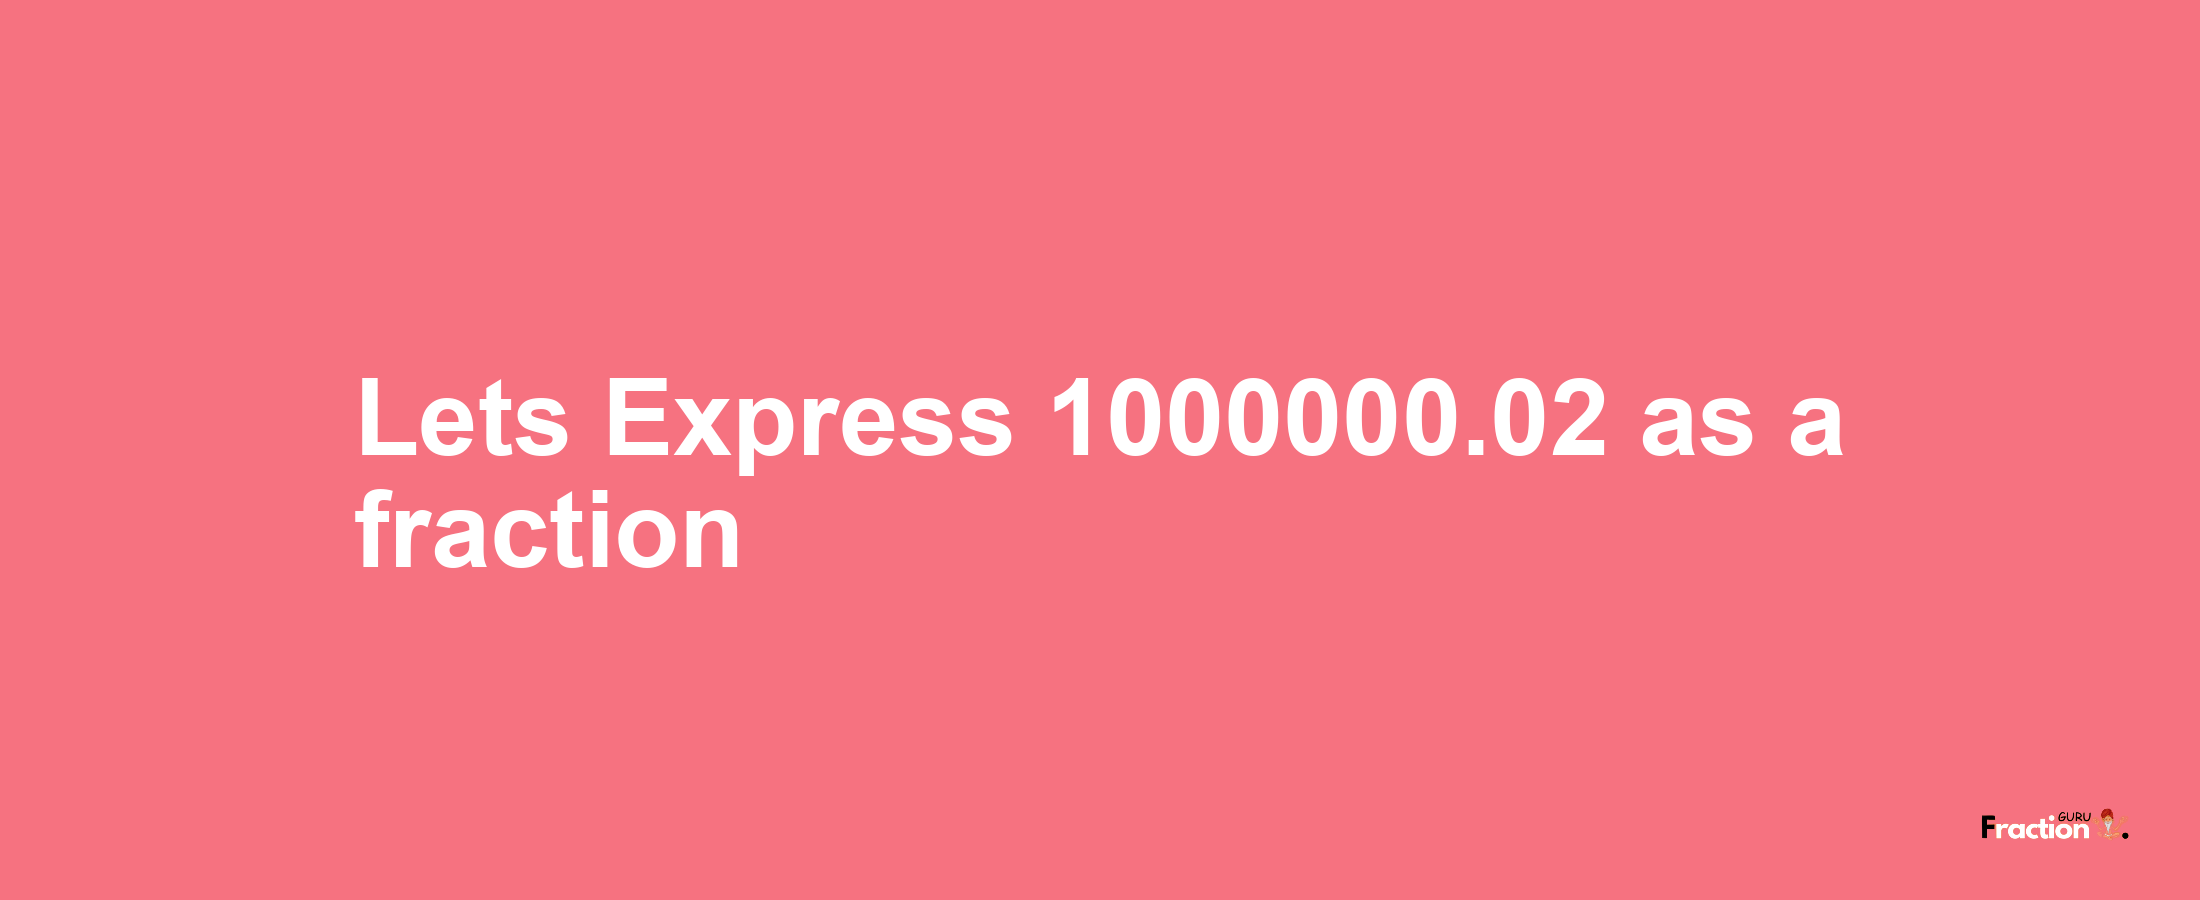 Lets Express 1000000.02 as afraction